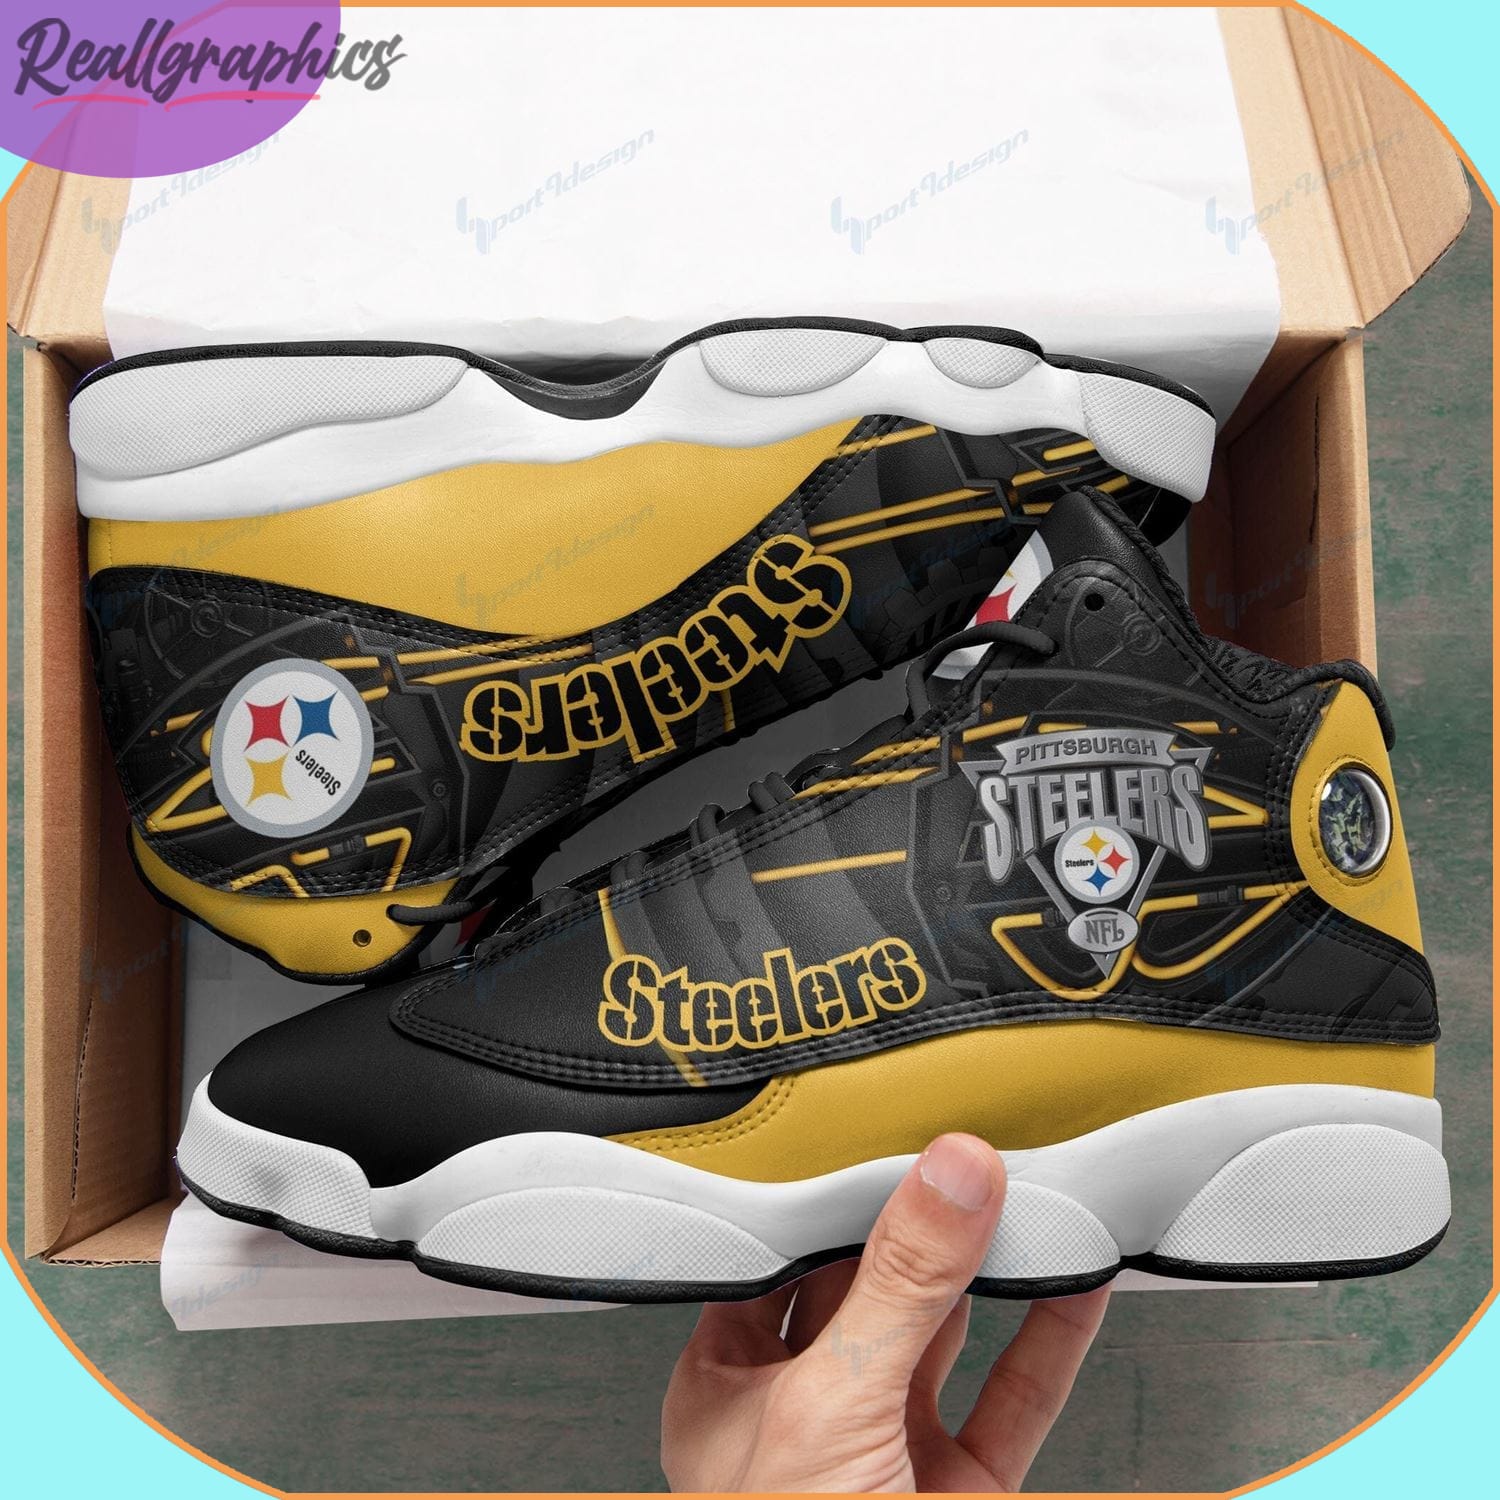 Pittsburgh Steelers Air Jordan 13 Sneaker, Pittsburgh Steelers Shoes For  Fans - Reallgraphics